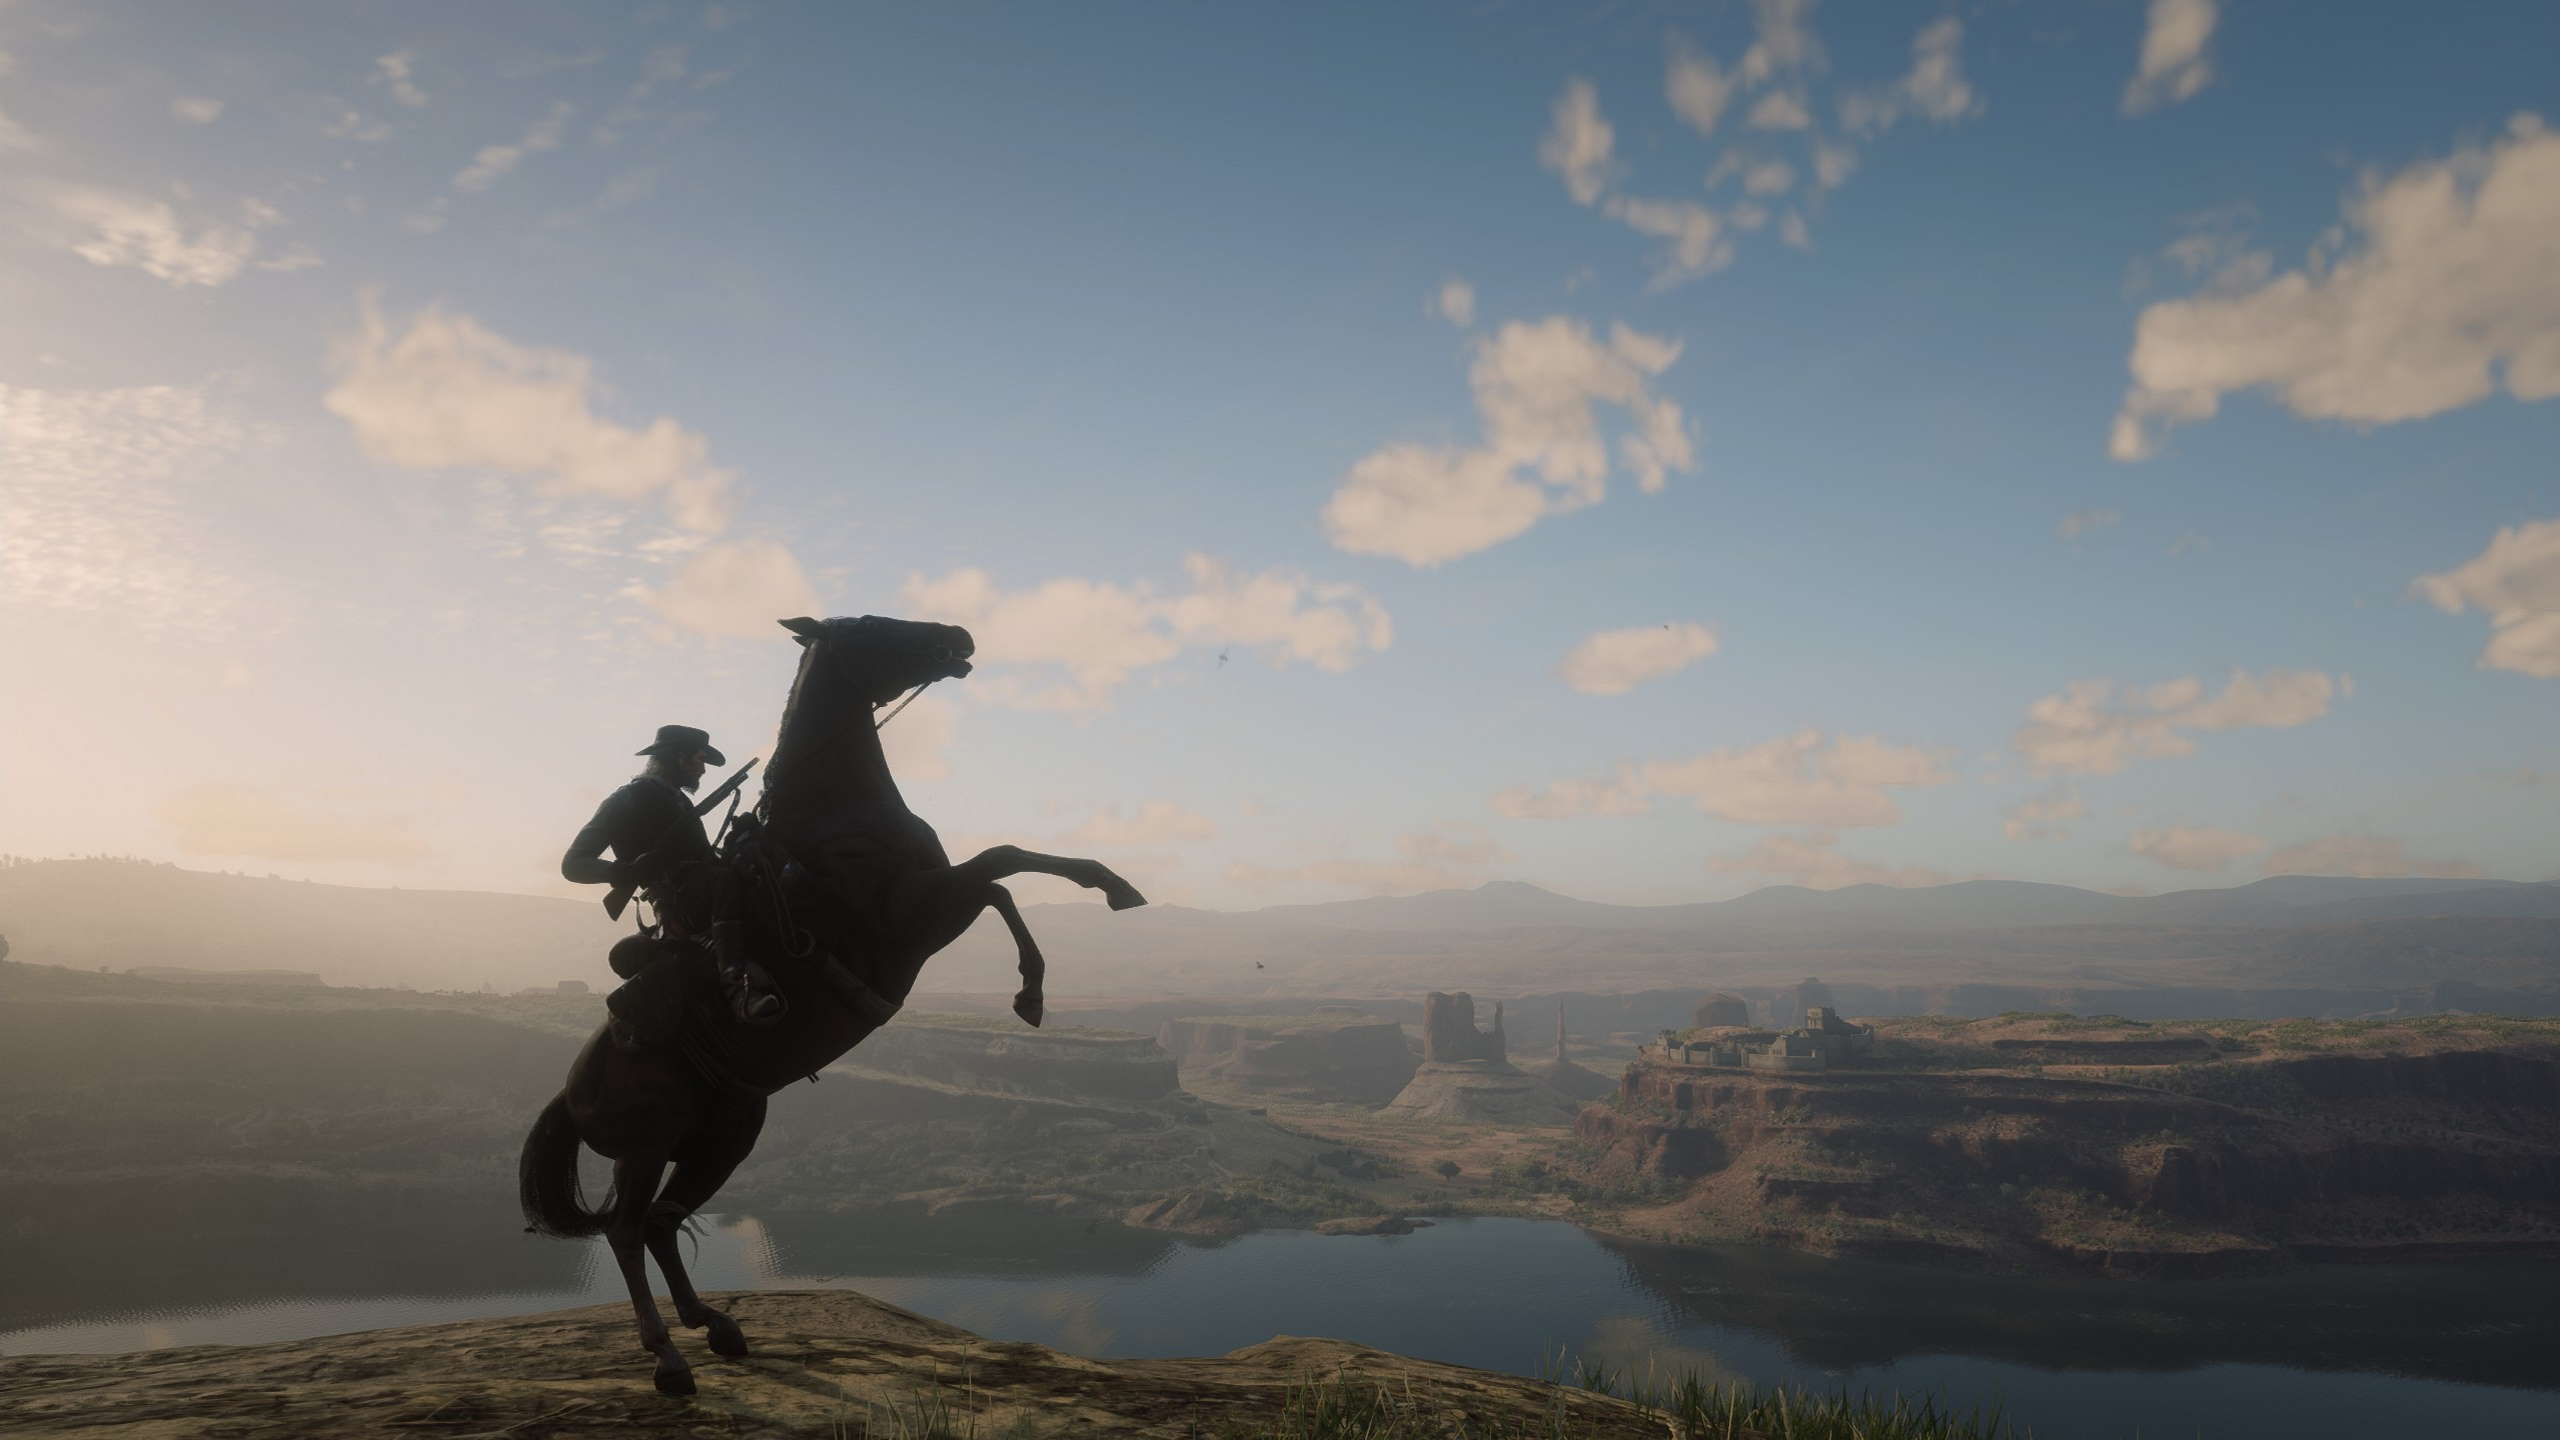 A beautiful vista in Red Dead Redemption 2 with a horse in the foreground